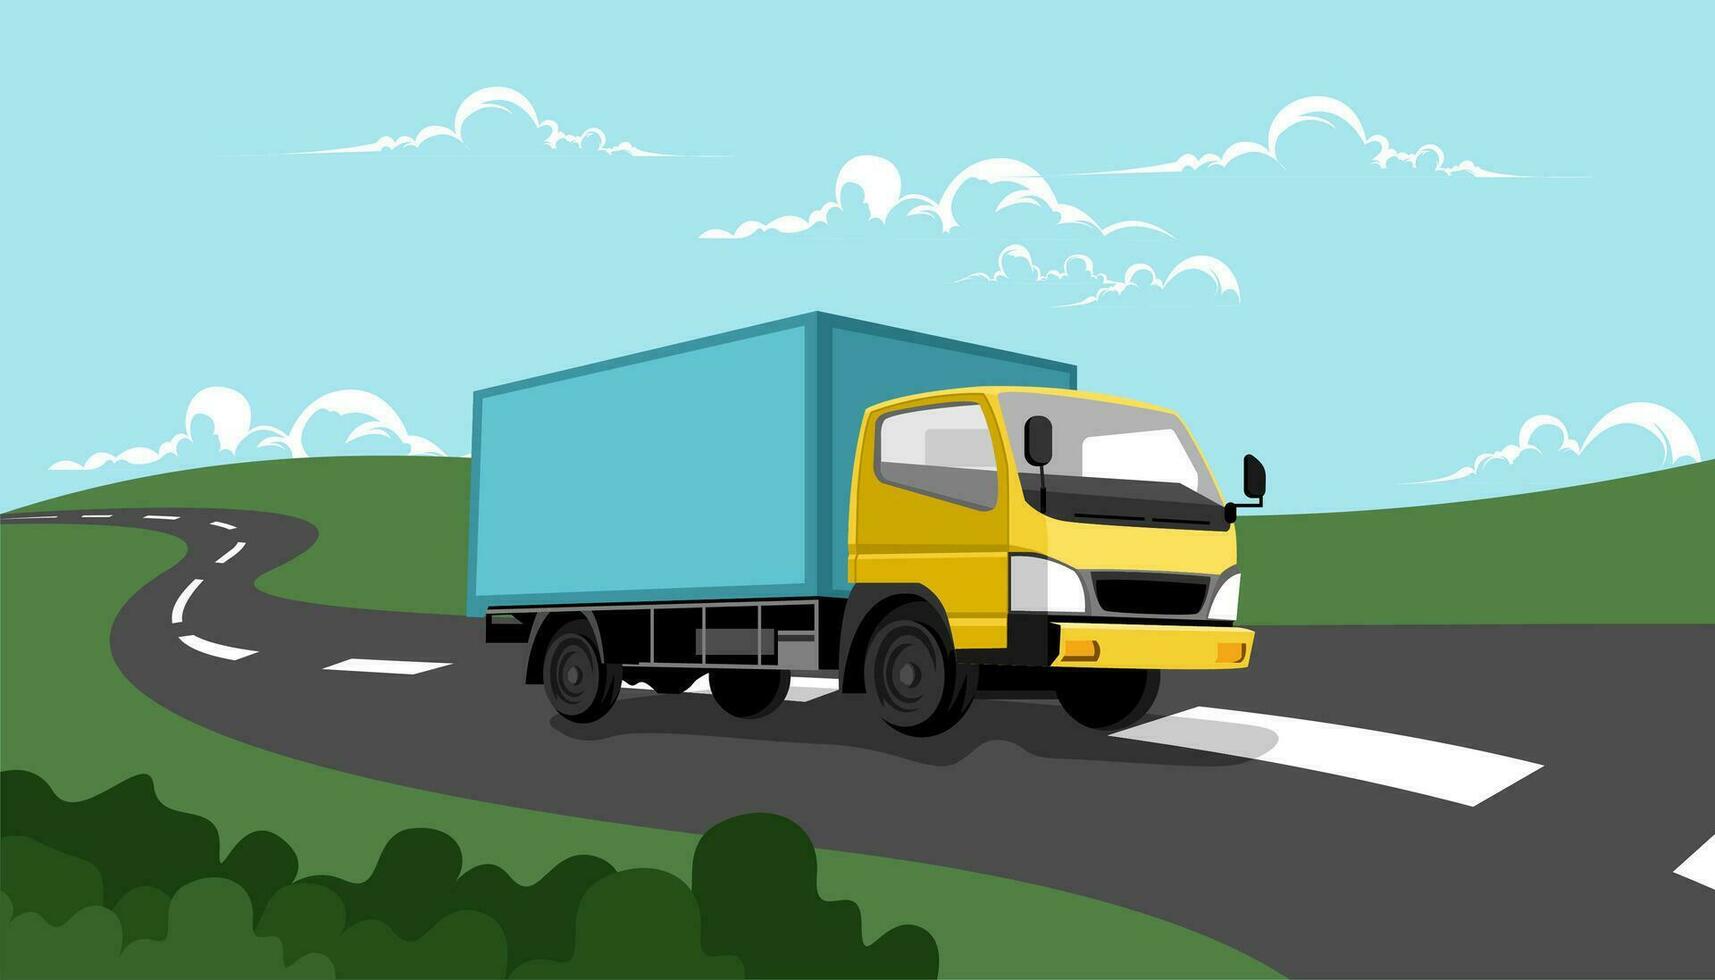 illustration of a box truck driving down the road vector